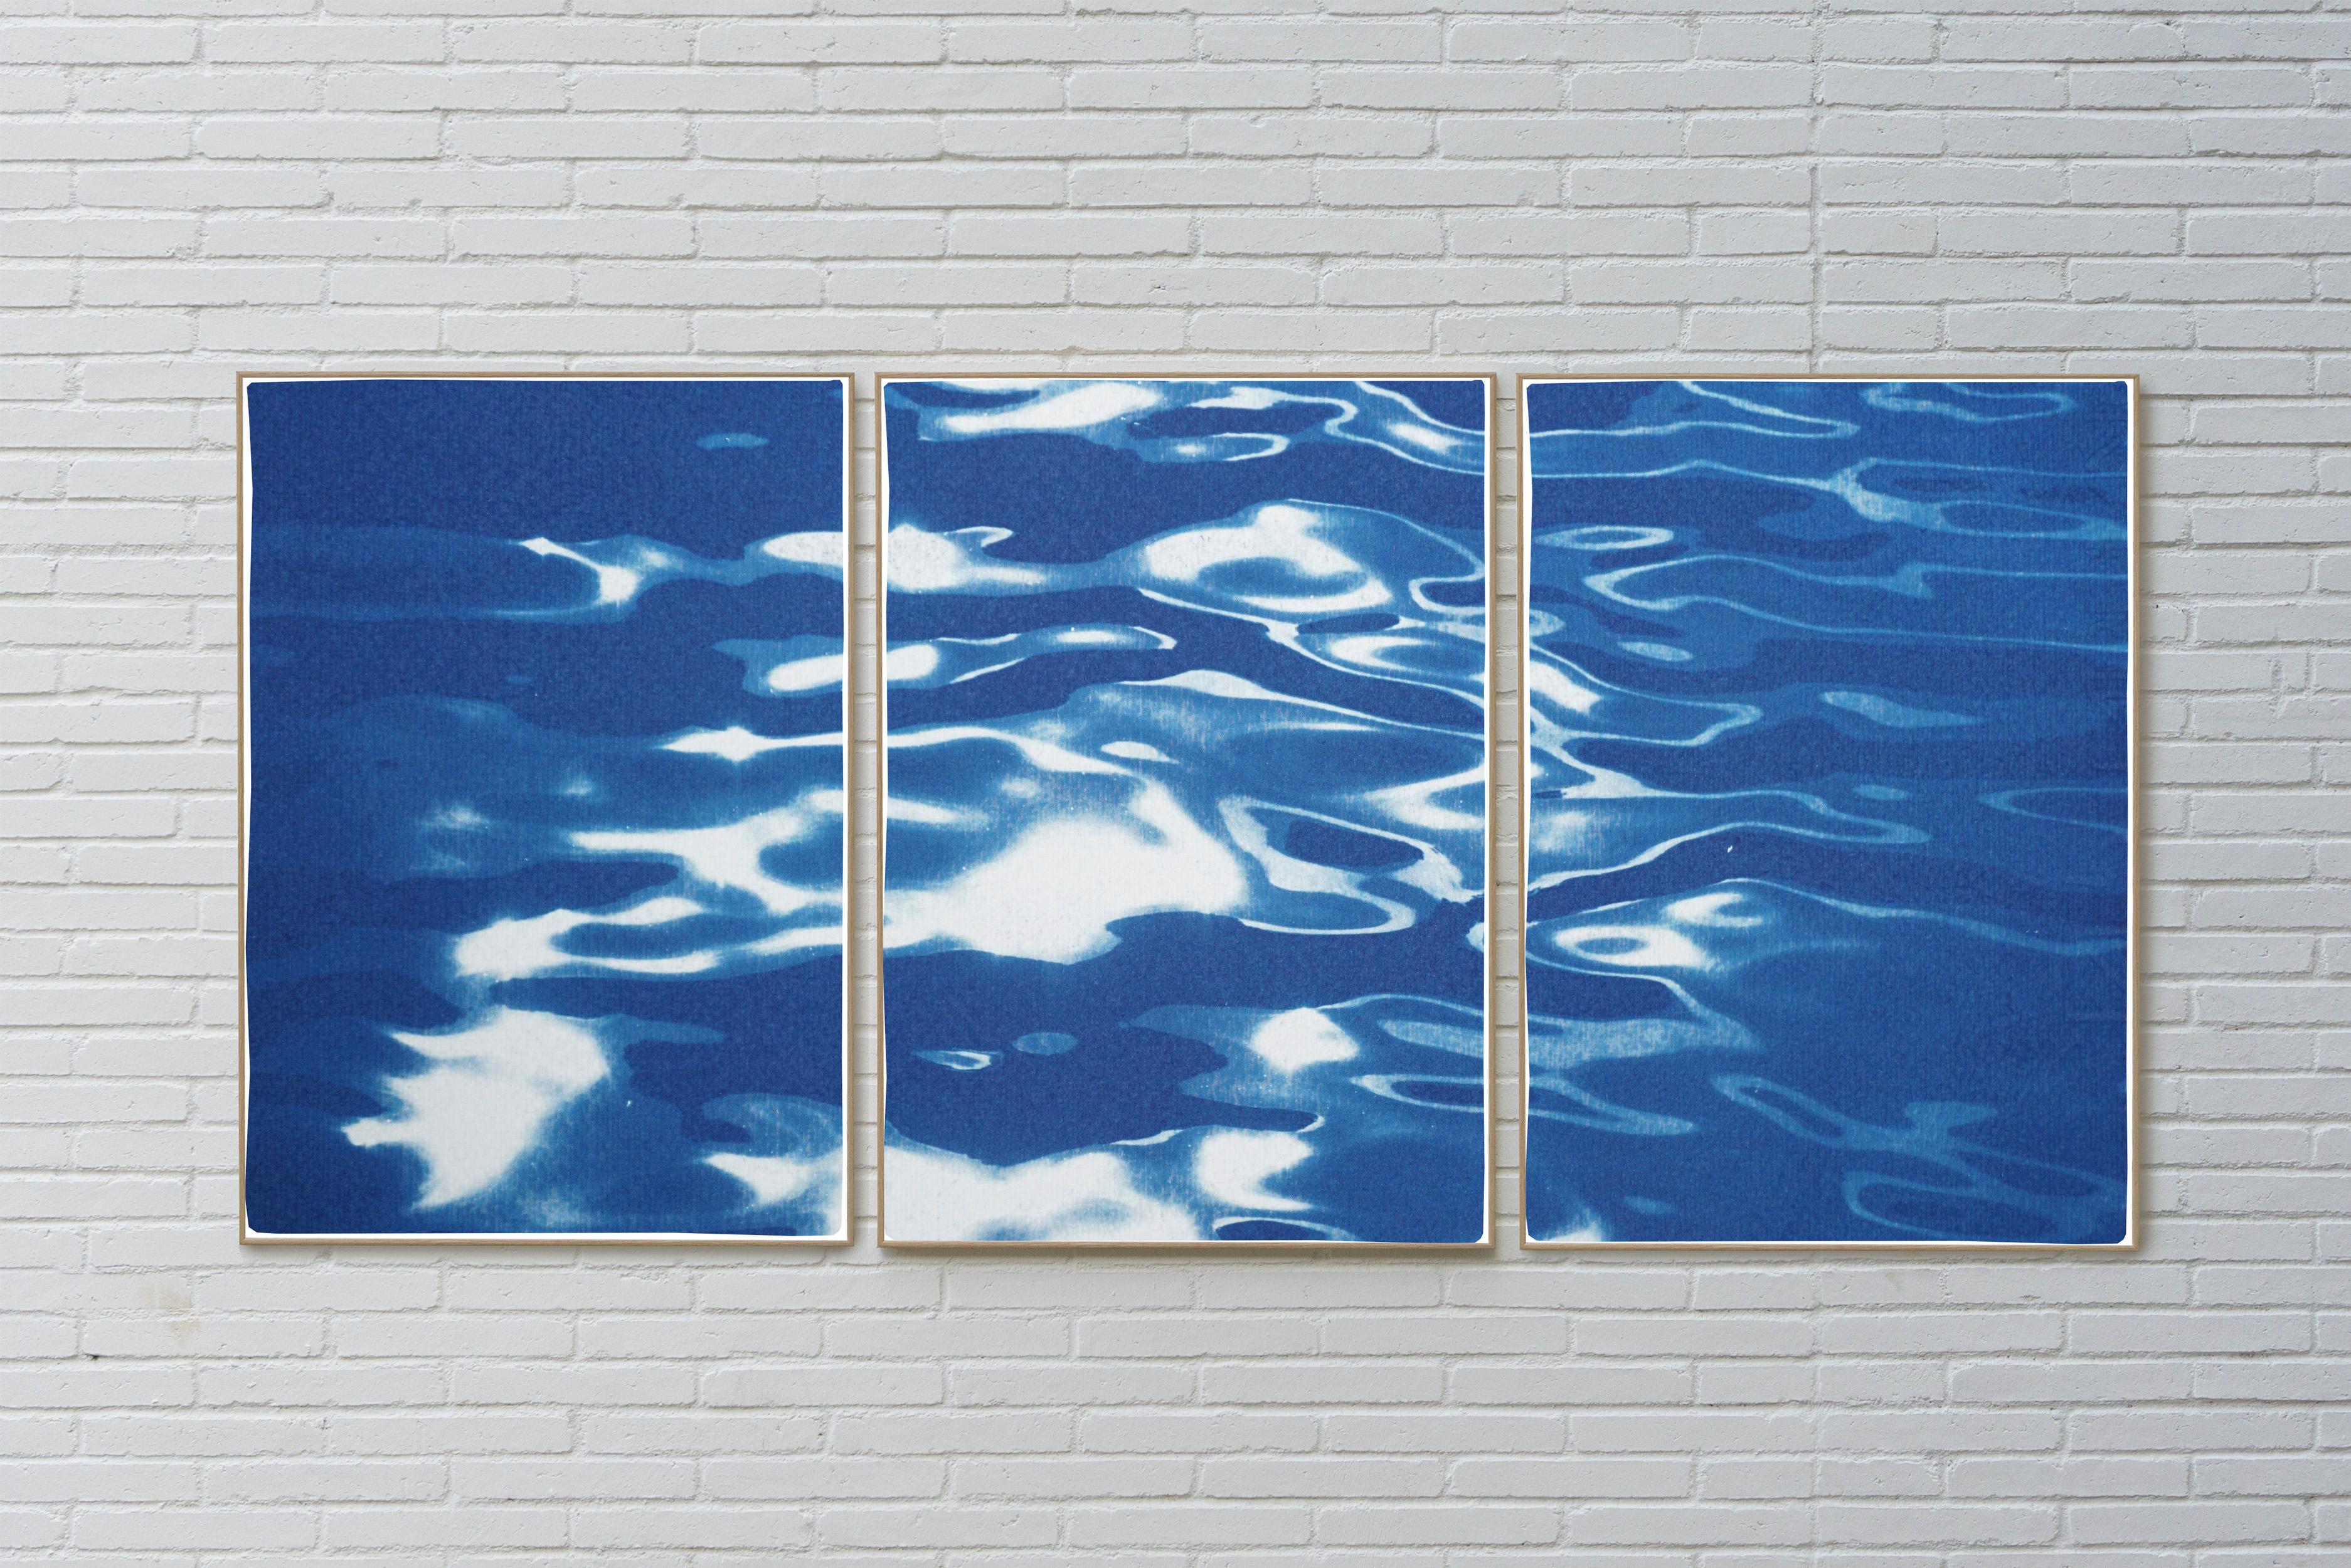 This is an exclusive handprinted limited edition cyanotype.

This beautiful triptych captures the reflection of lights and movements of the shallow waters that surround the iconic Lido Island in Venice. 

Details:
+ Title: Reflections off Lido